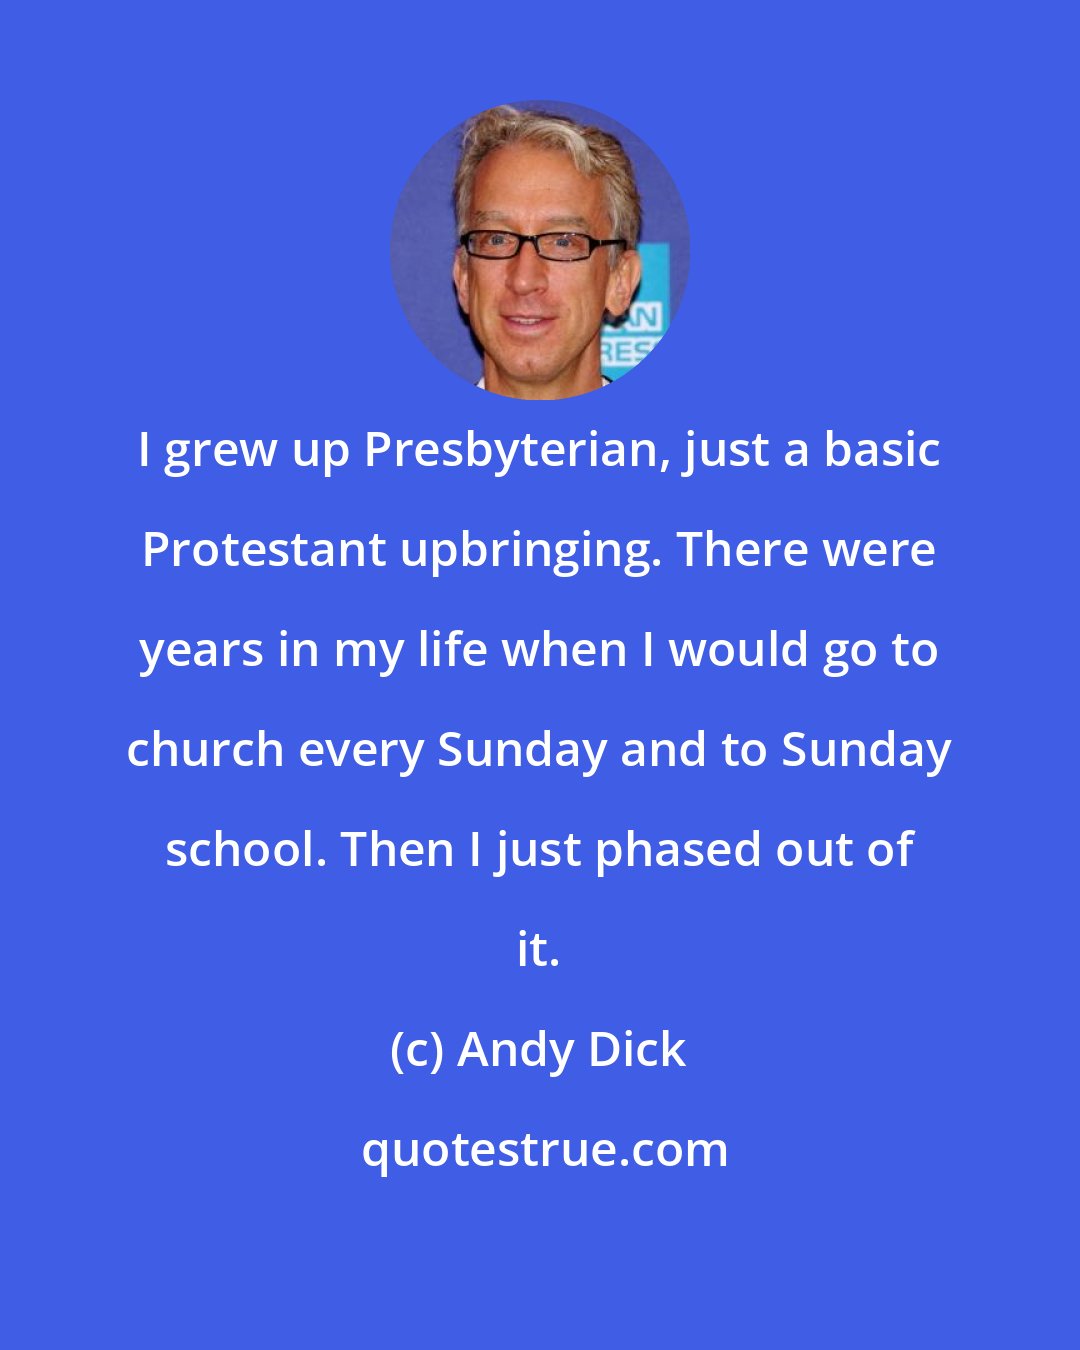 Andy Dick: I grew up Presbyterian, just a basic Protestant upbringing. There were years in my life when I would go to church every Sunday and to Sunday school. Then I just phased out of it.